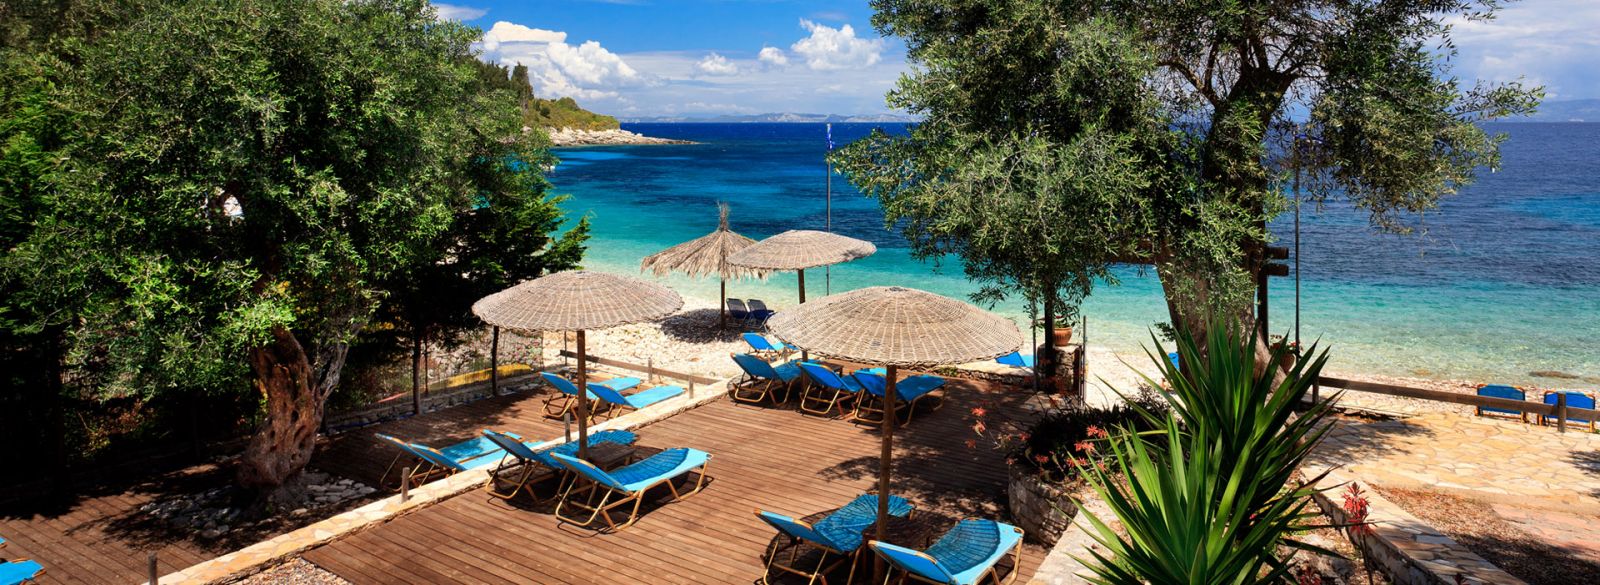 Is Paxos good for couples?